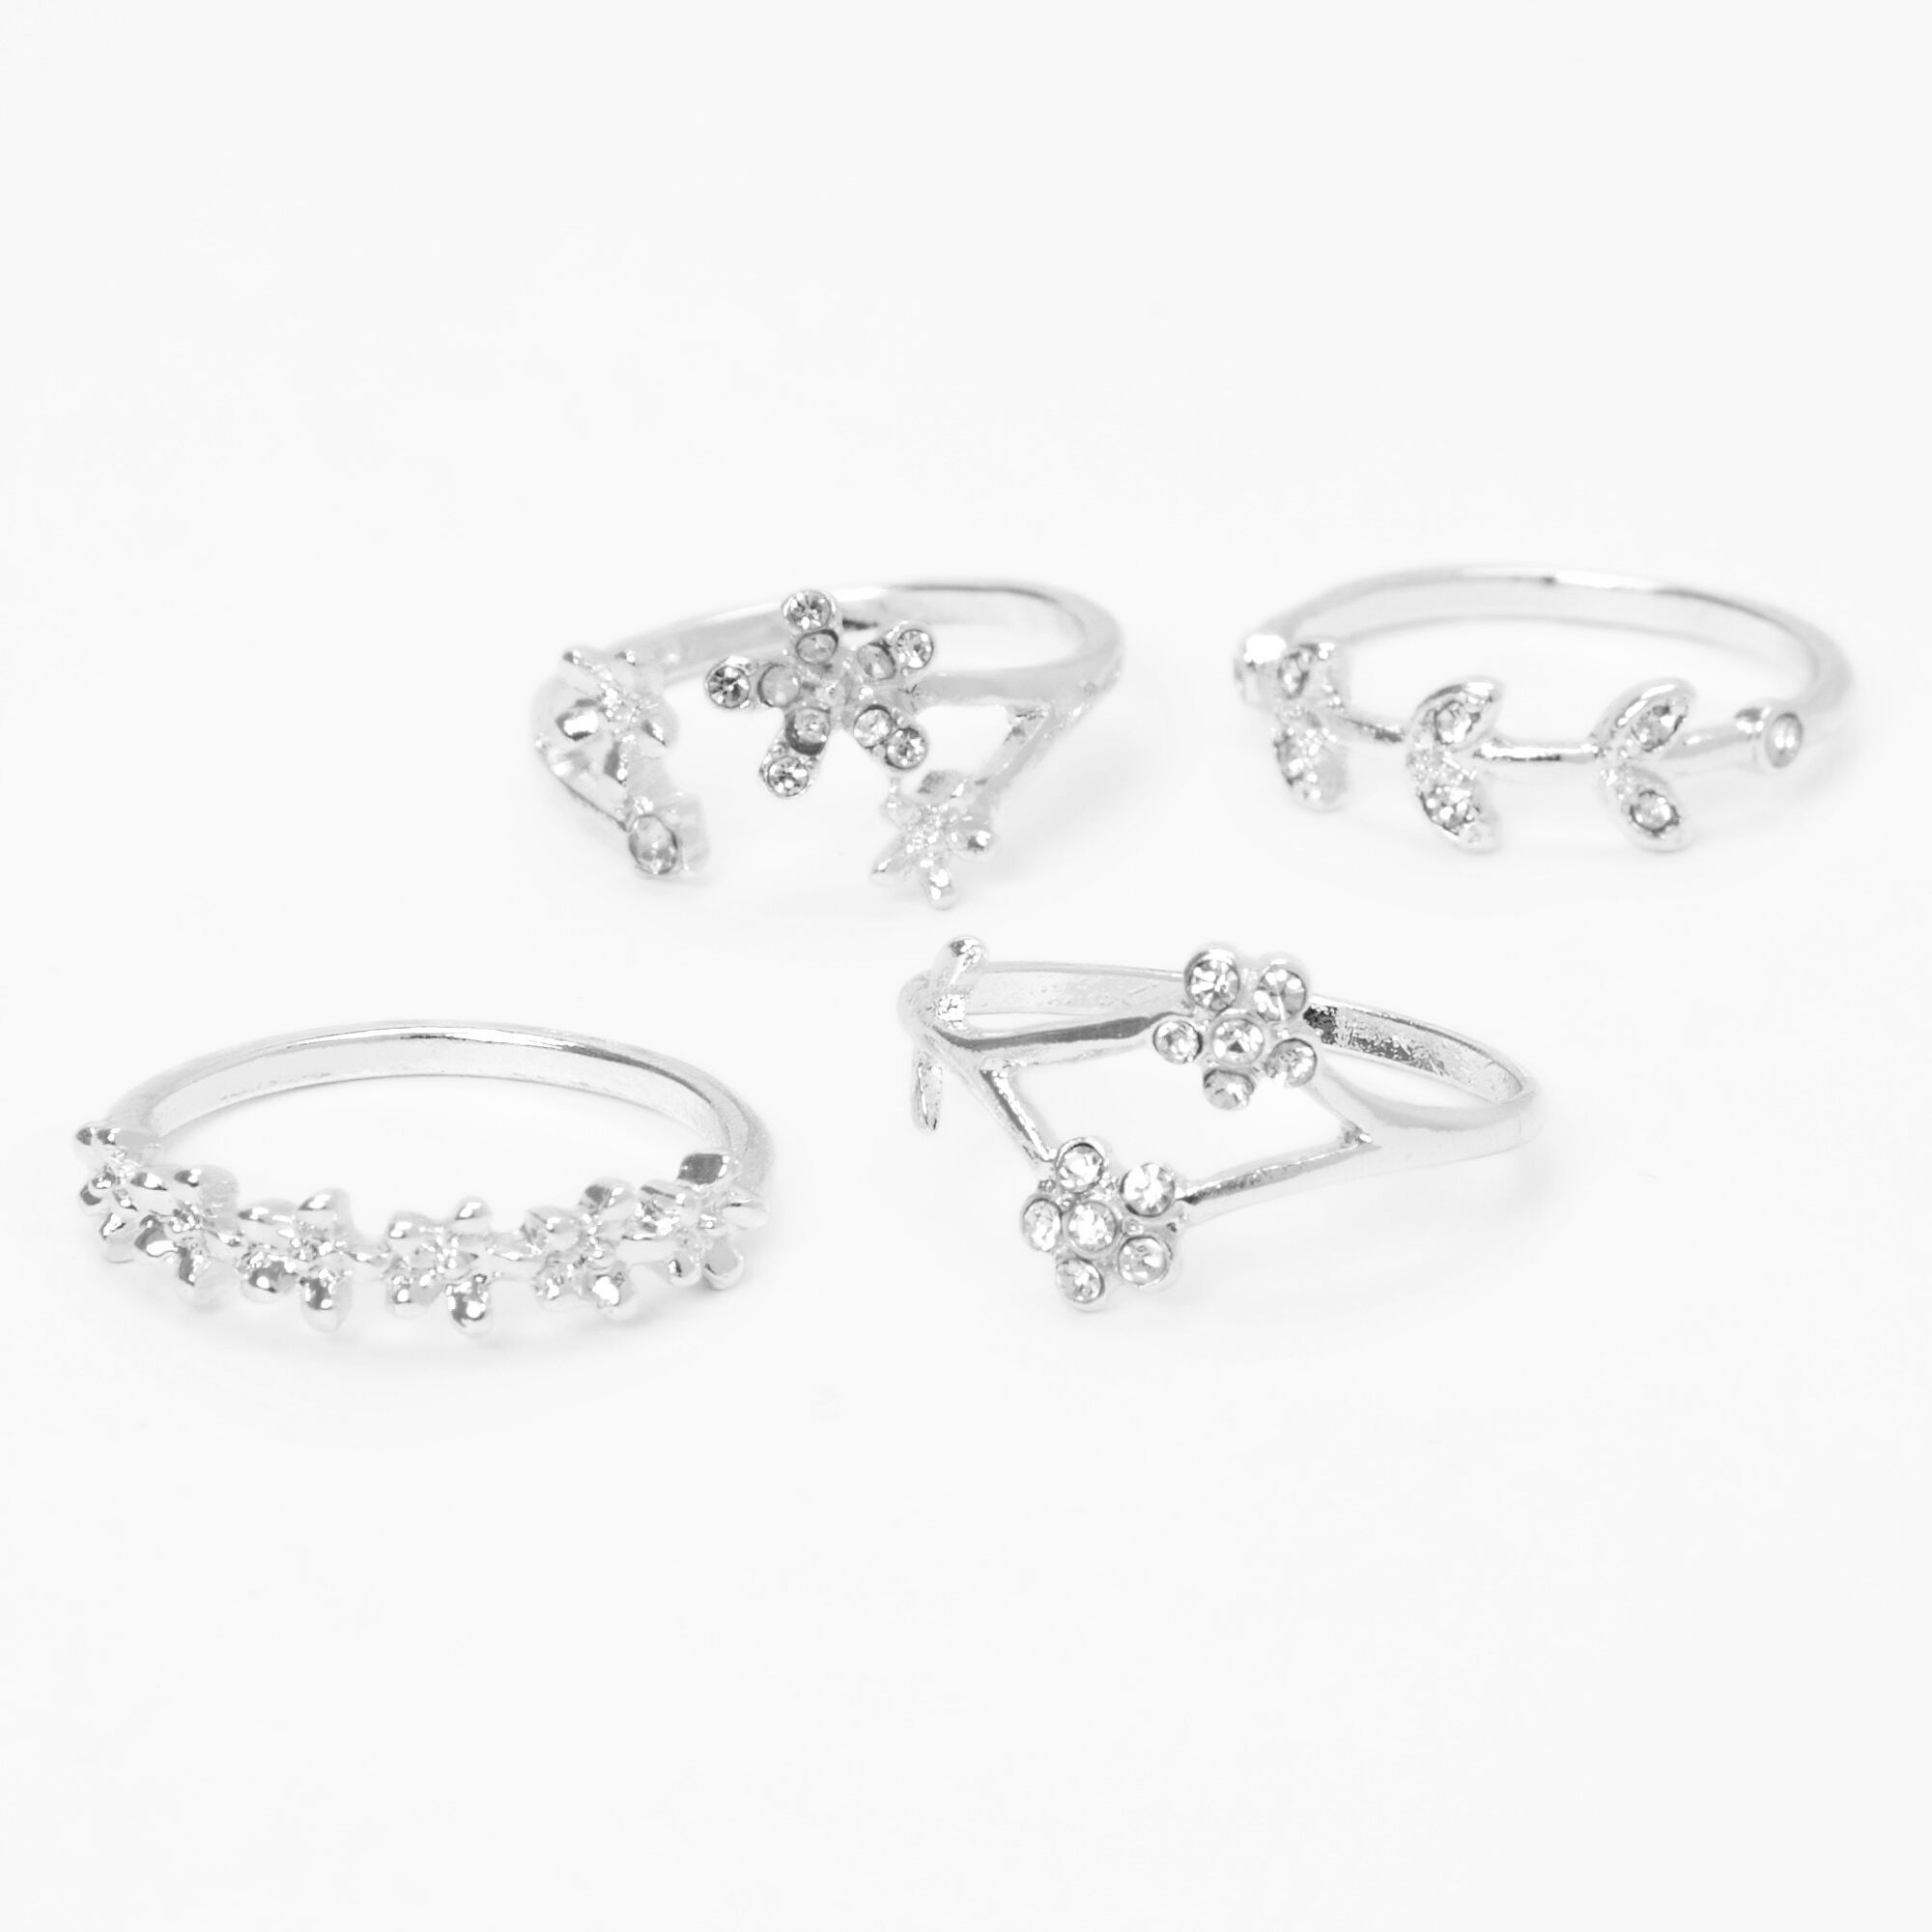 View Claires Embellished Flower Vine Rings 4 Pack Silver information